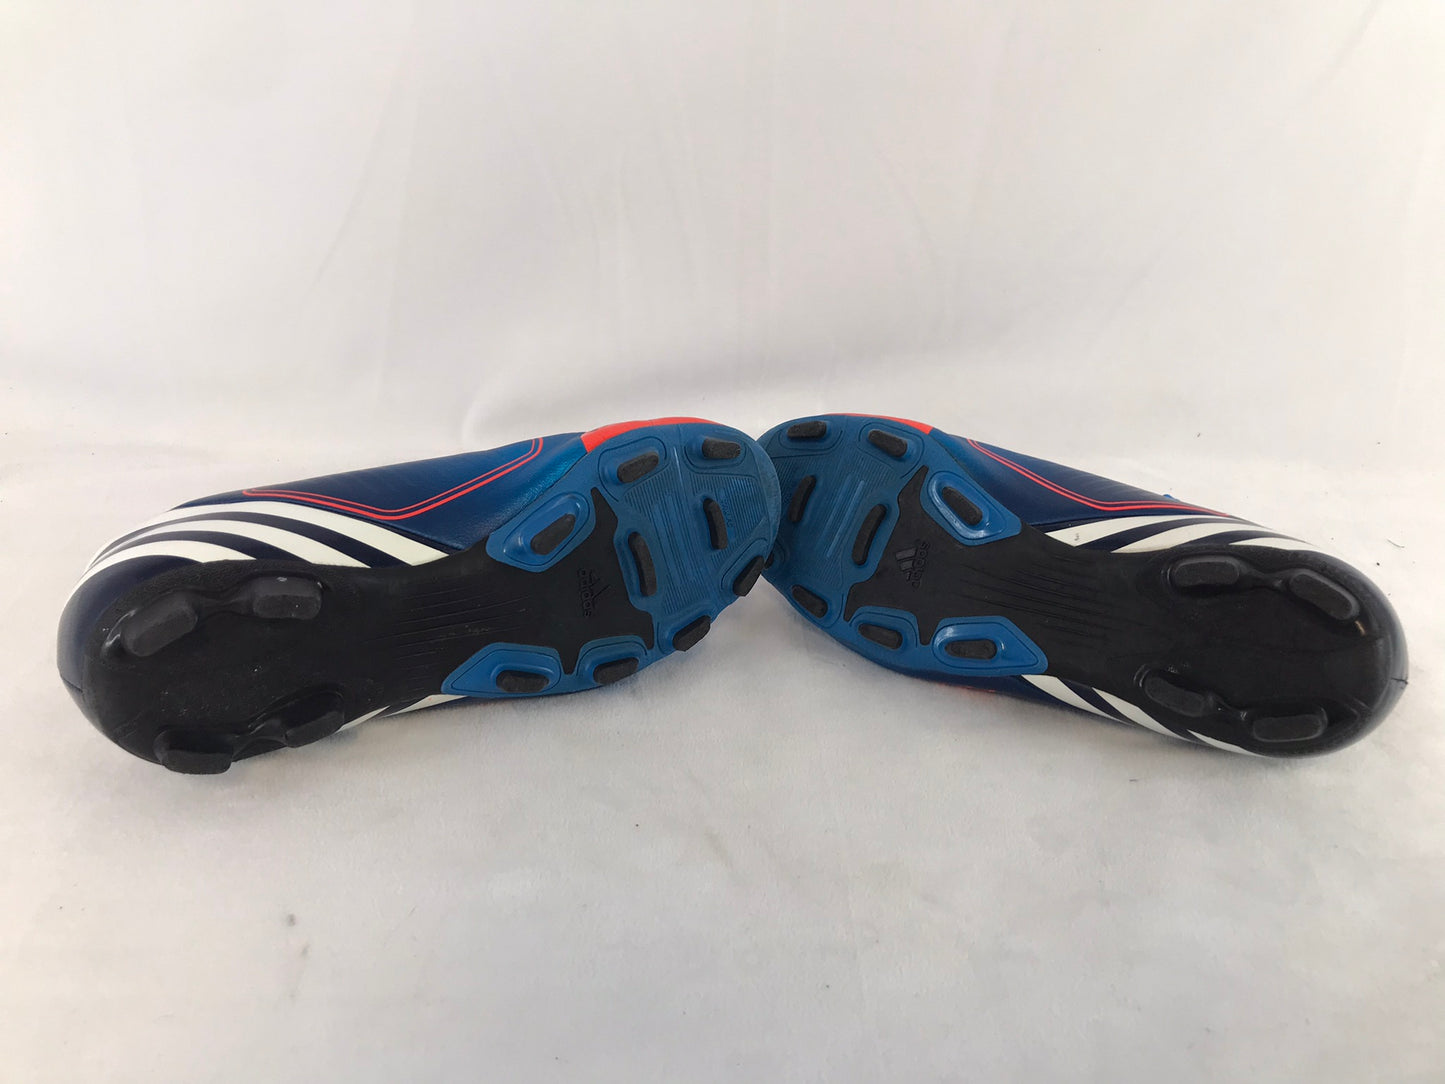 Soccer Shoes Cleats Child Size 3 Adidas Preditor Blue Orange